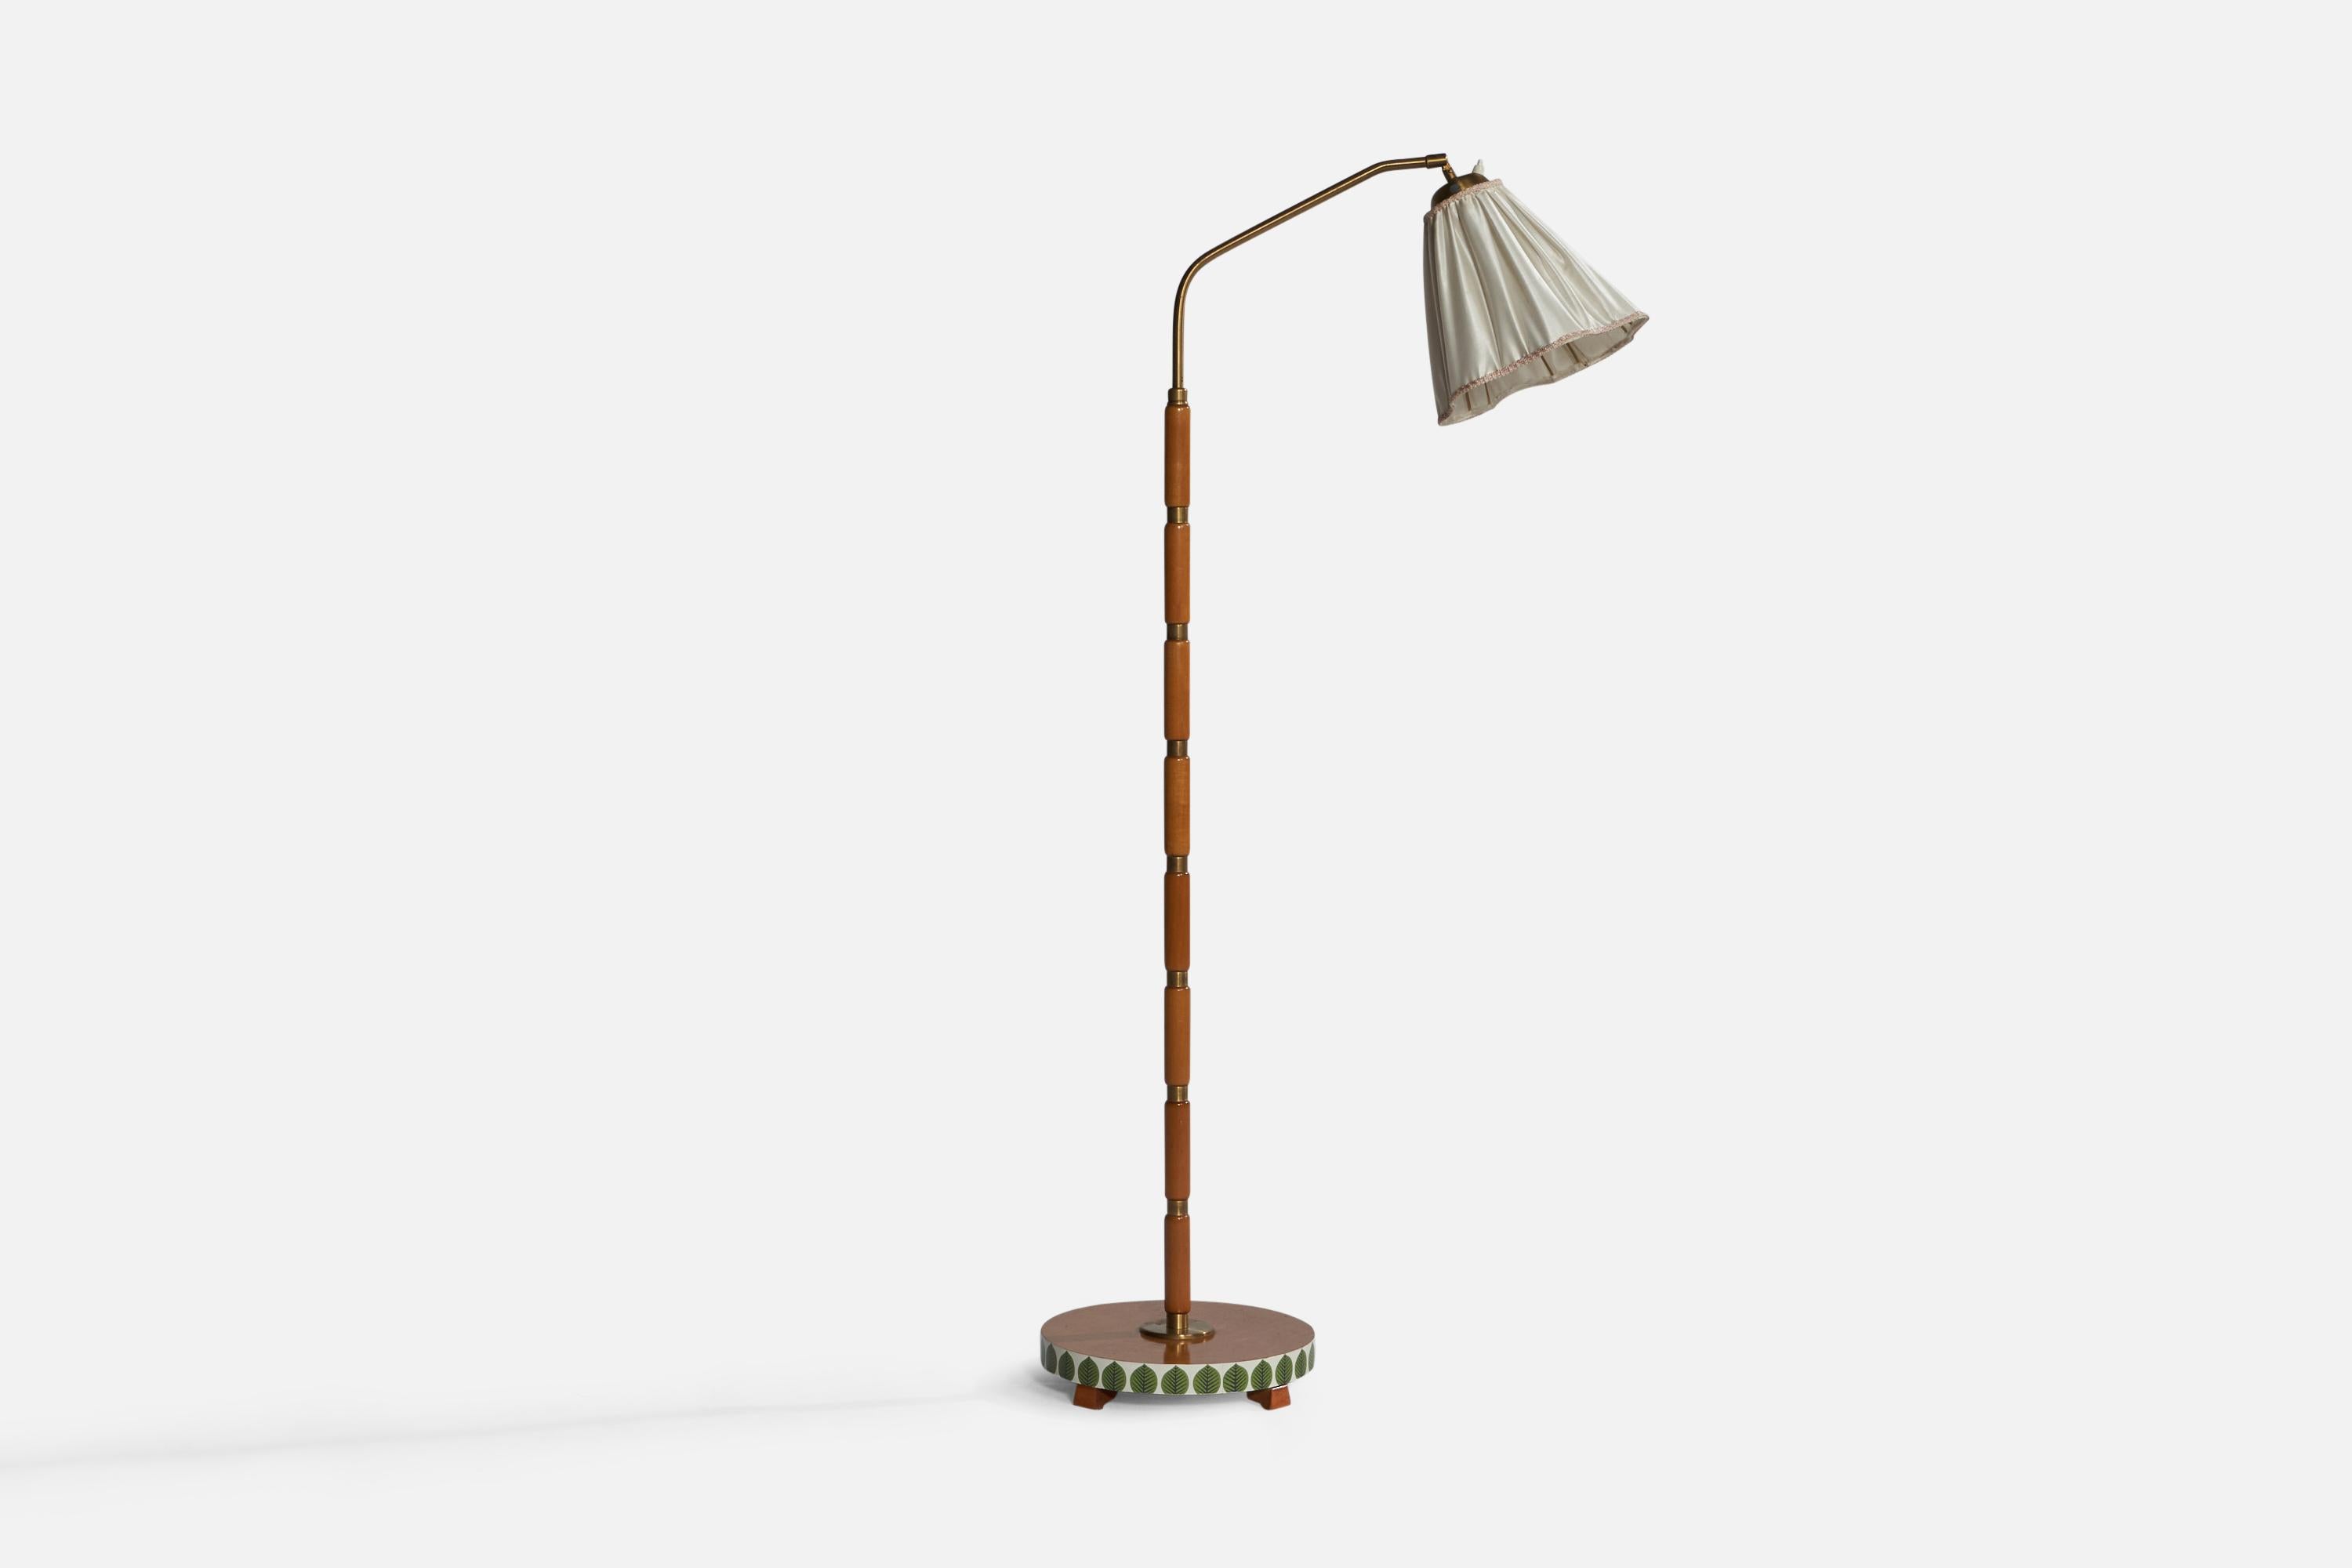 An adjustable brass, teak and off-white fabric floor lamp designed and produced in Sweden, 1940s.

With a later added laminated print to base illustrating a Stig Lindberg pattern.

Overall Dimensions (inches): 55.1” H x 12.5” W x 29” D. Stated